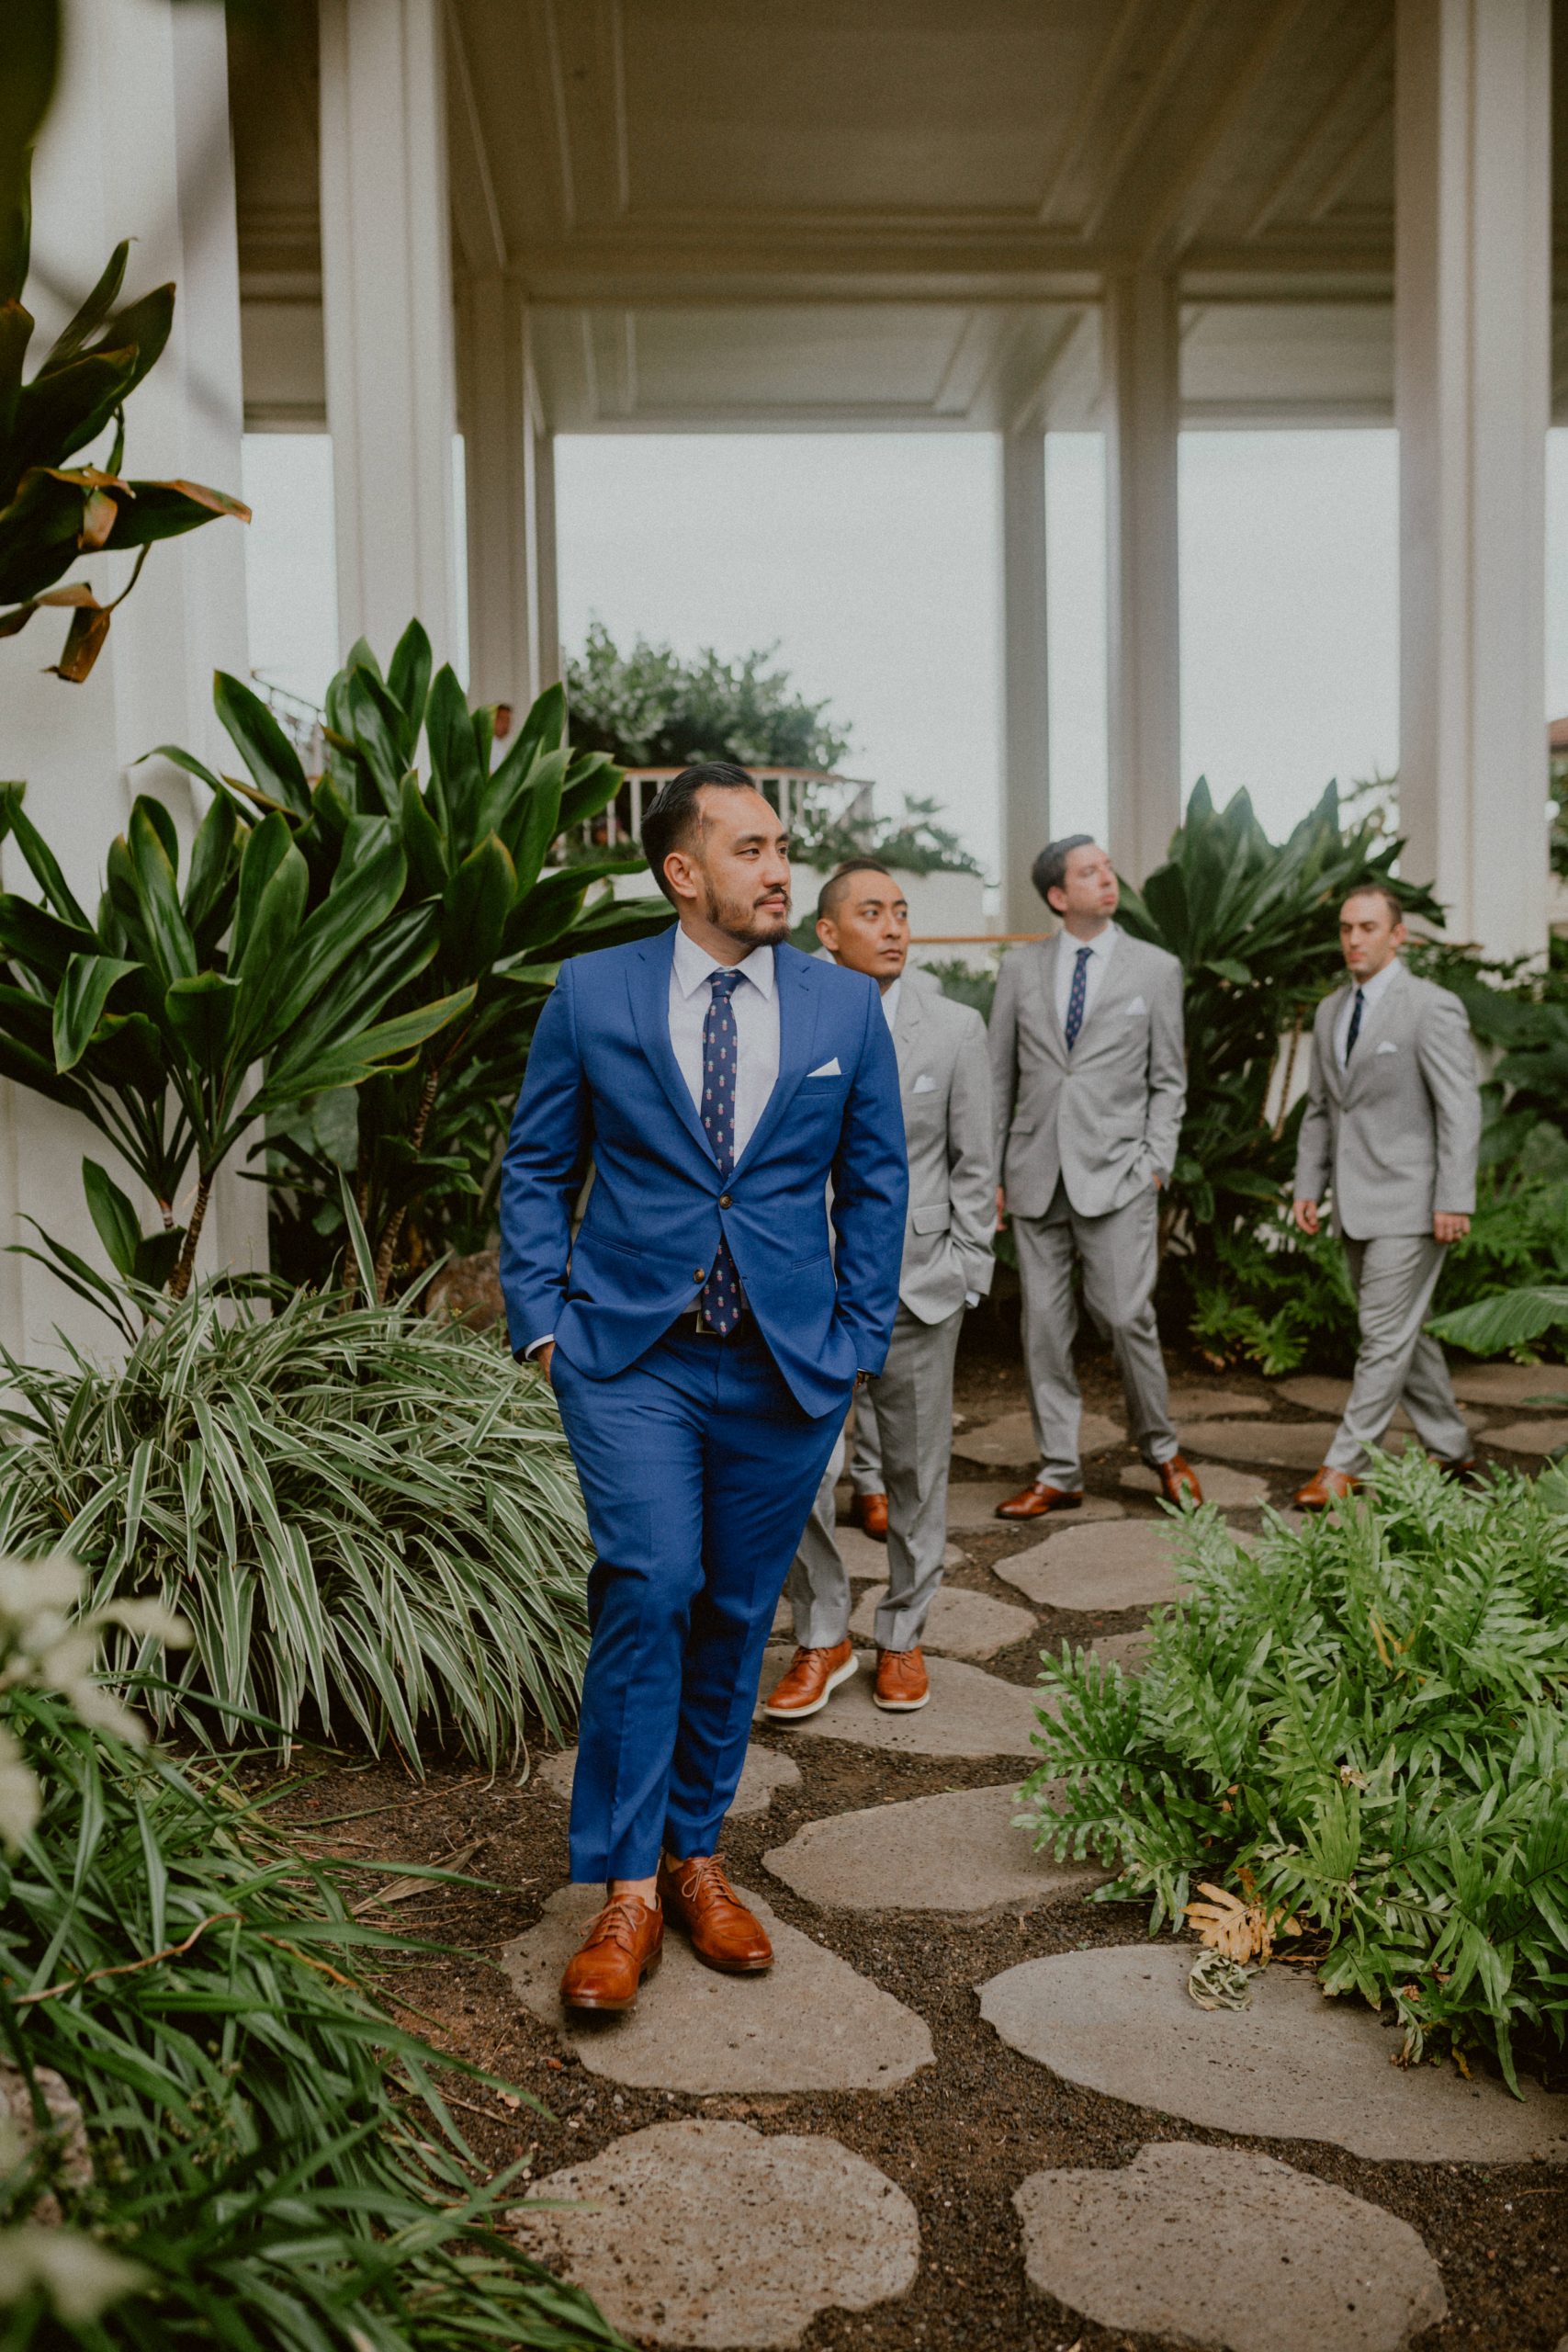 Groom in blue suit walks down a stone path in a hotel followed by three groomsmen in grey suits | Groom style tips, Groom wedding day inspiration, Groom Tips Wedding, Groom tips for men, Groom tips | chelseaabril.com